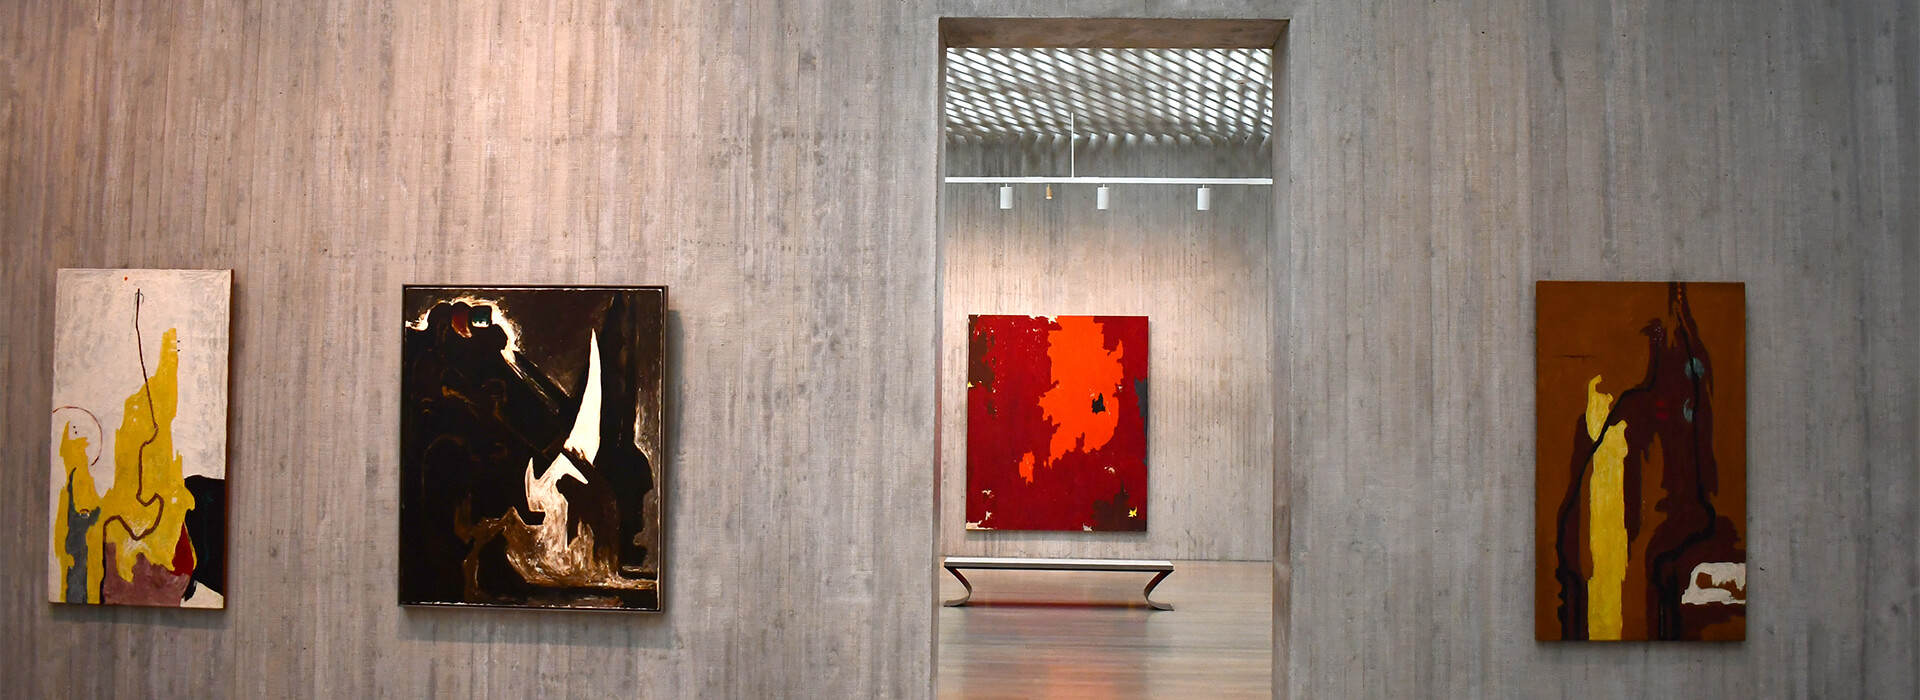 Three abstract paintings hang on a concrete wall and one hangs on a wall visible through a doorway in between the paintings